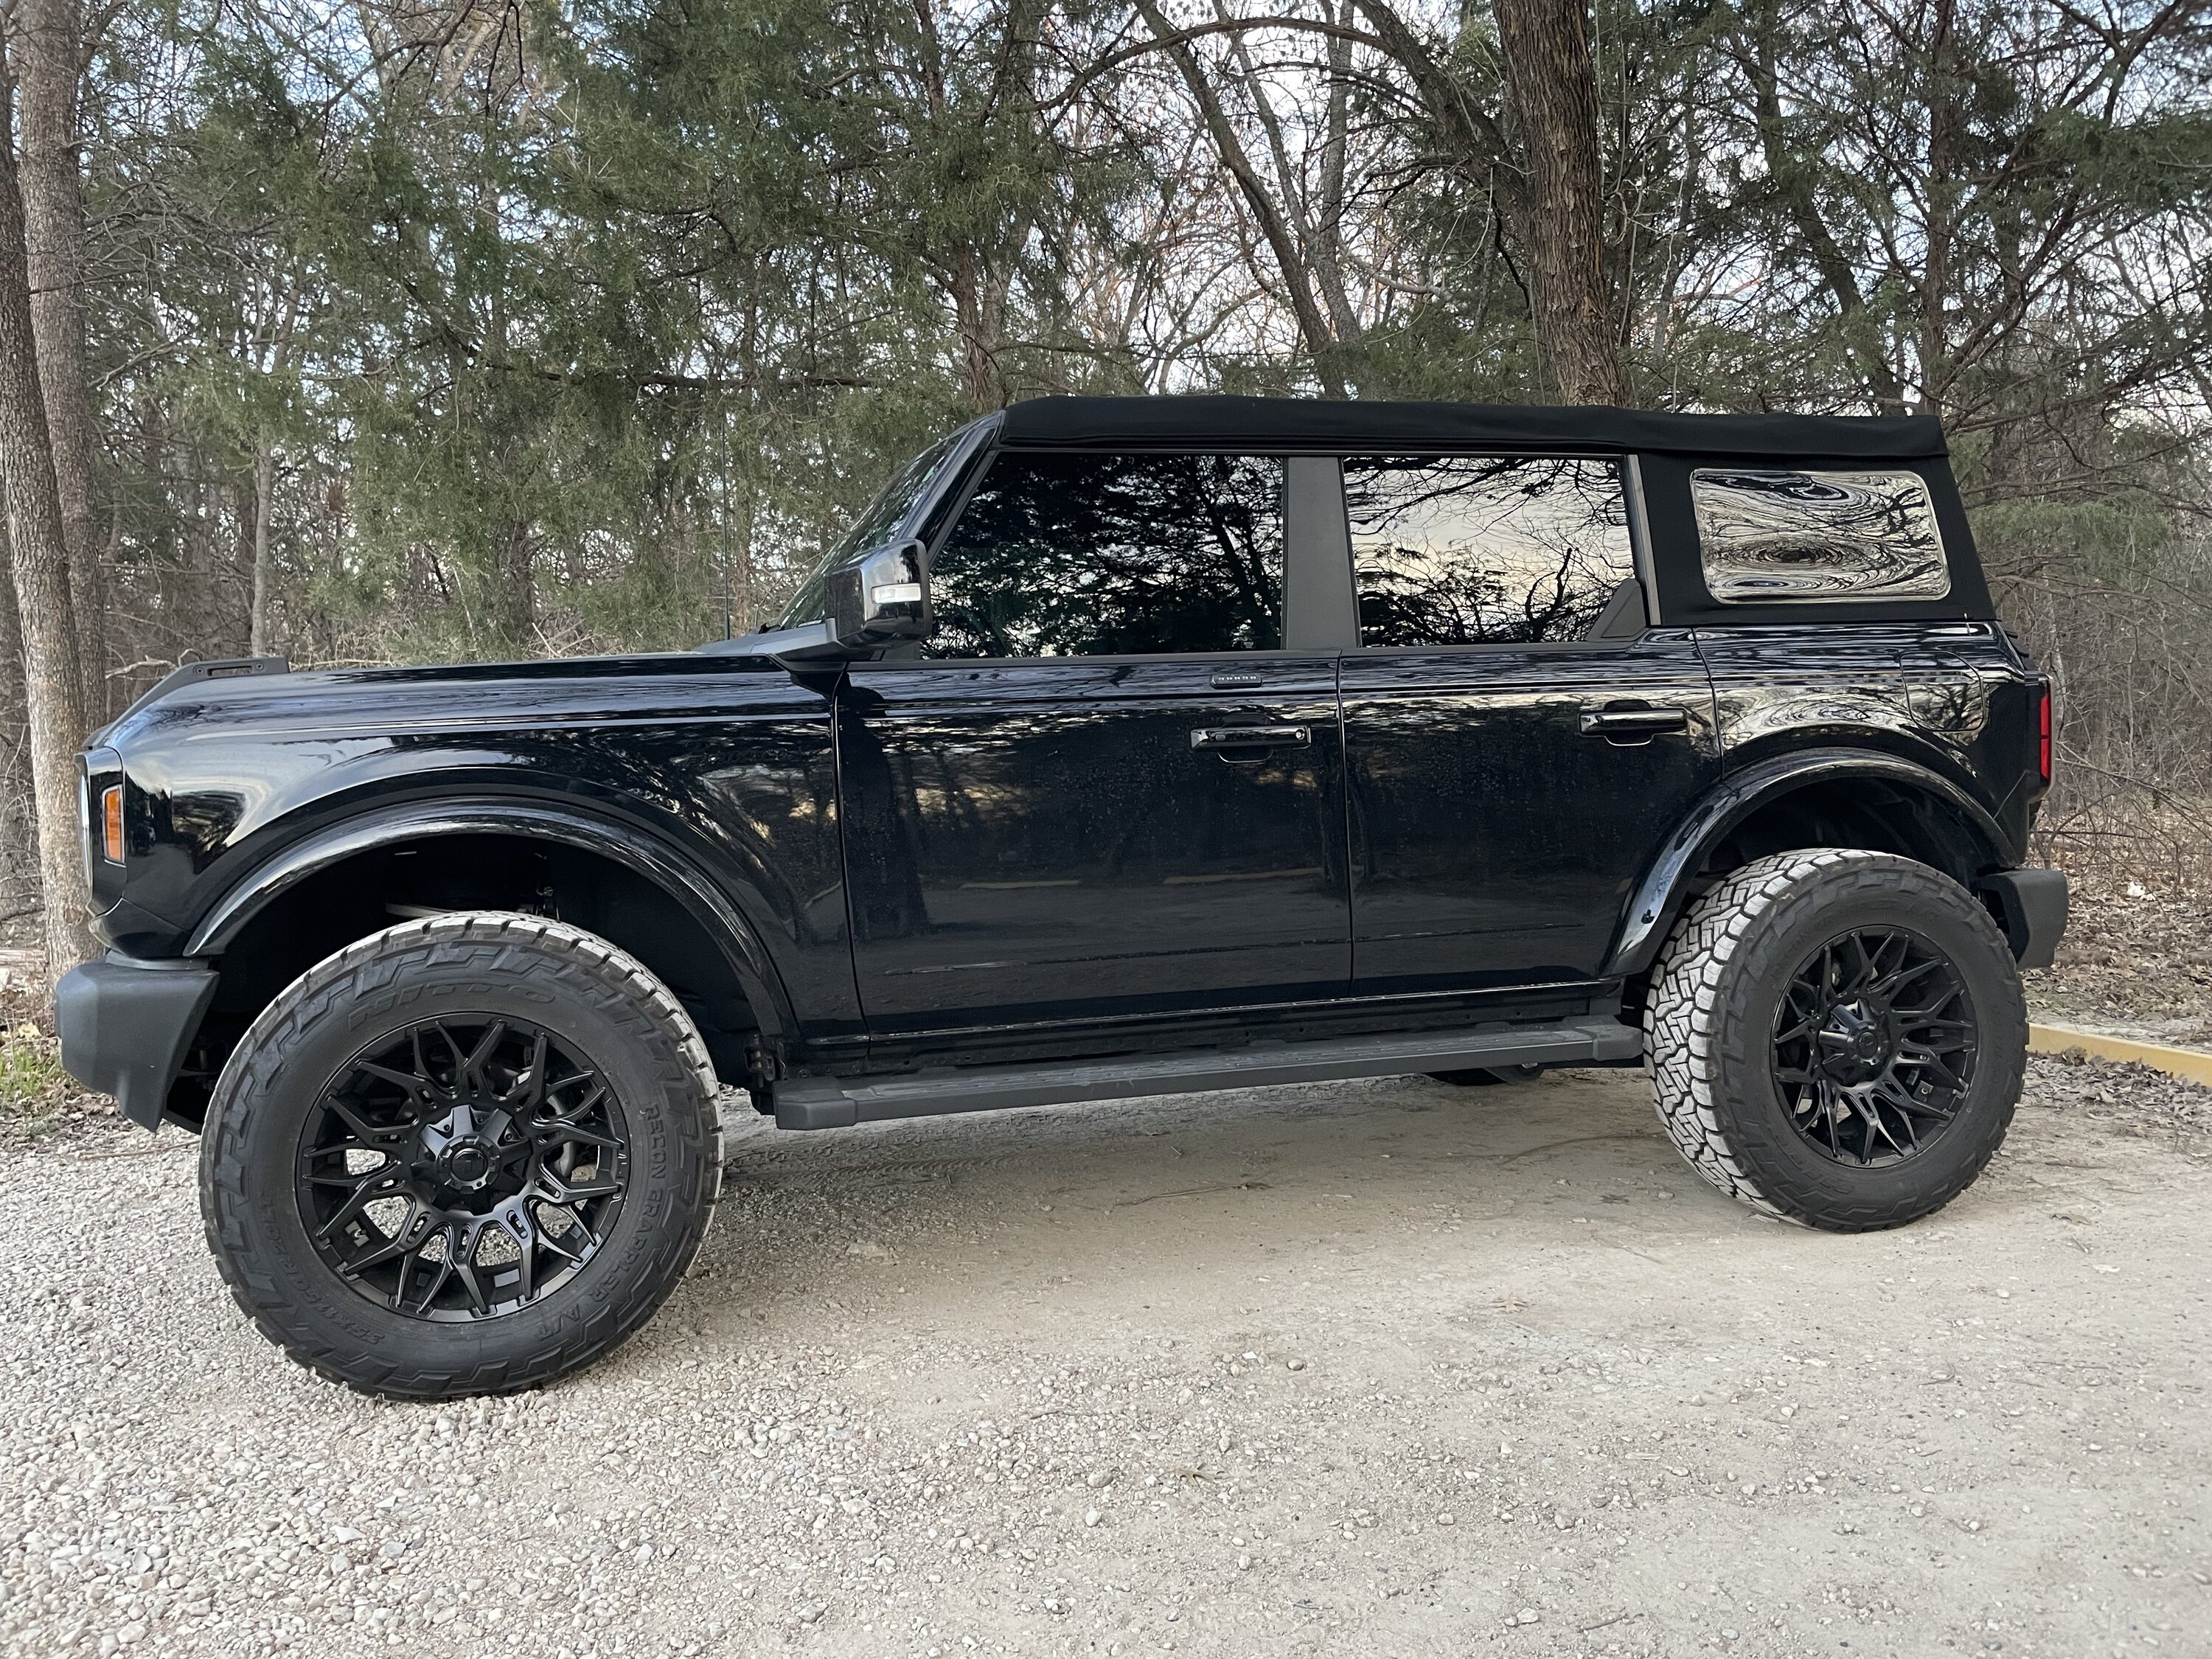 Ford Bronco 2022 Outer Banks (Non-Sas) Build - Wife's Daily Driver - Blacked-Out IMG_1699